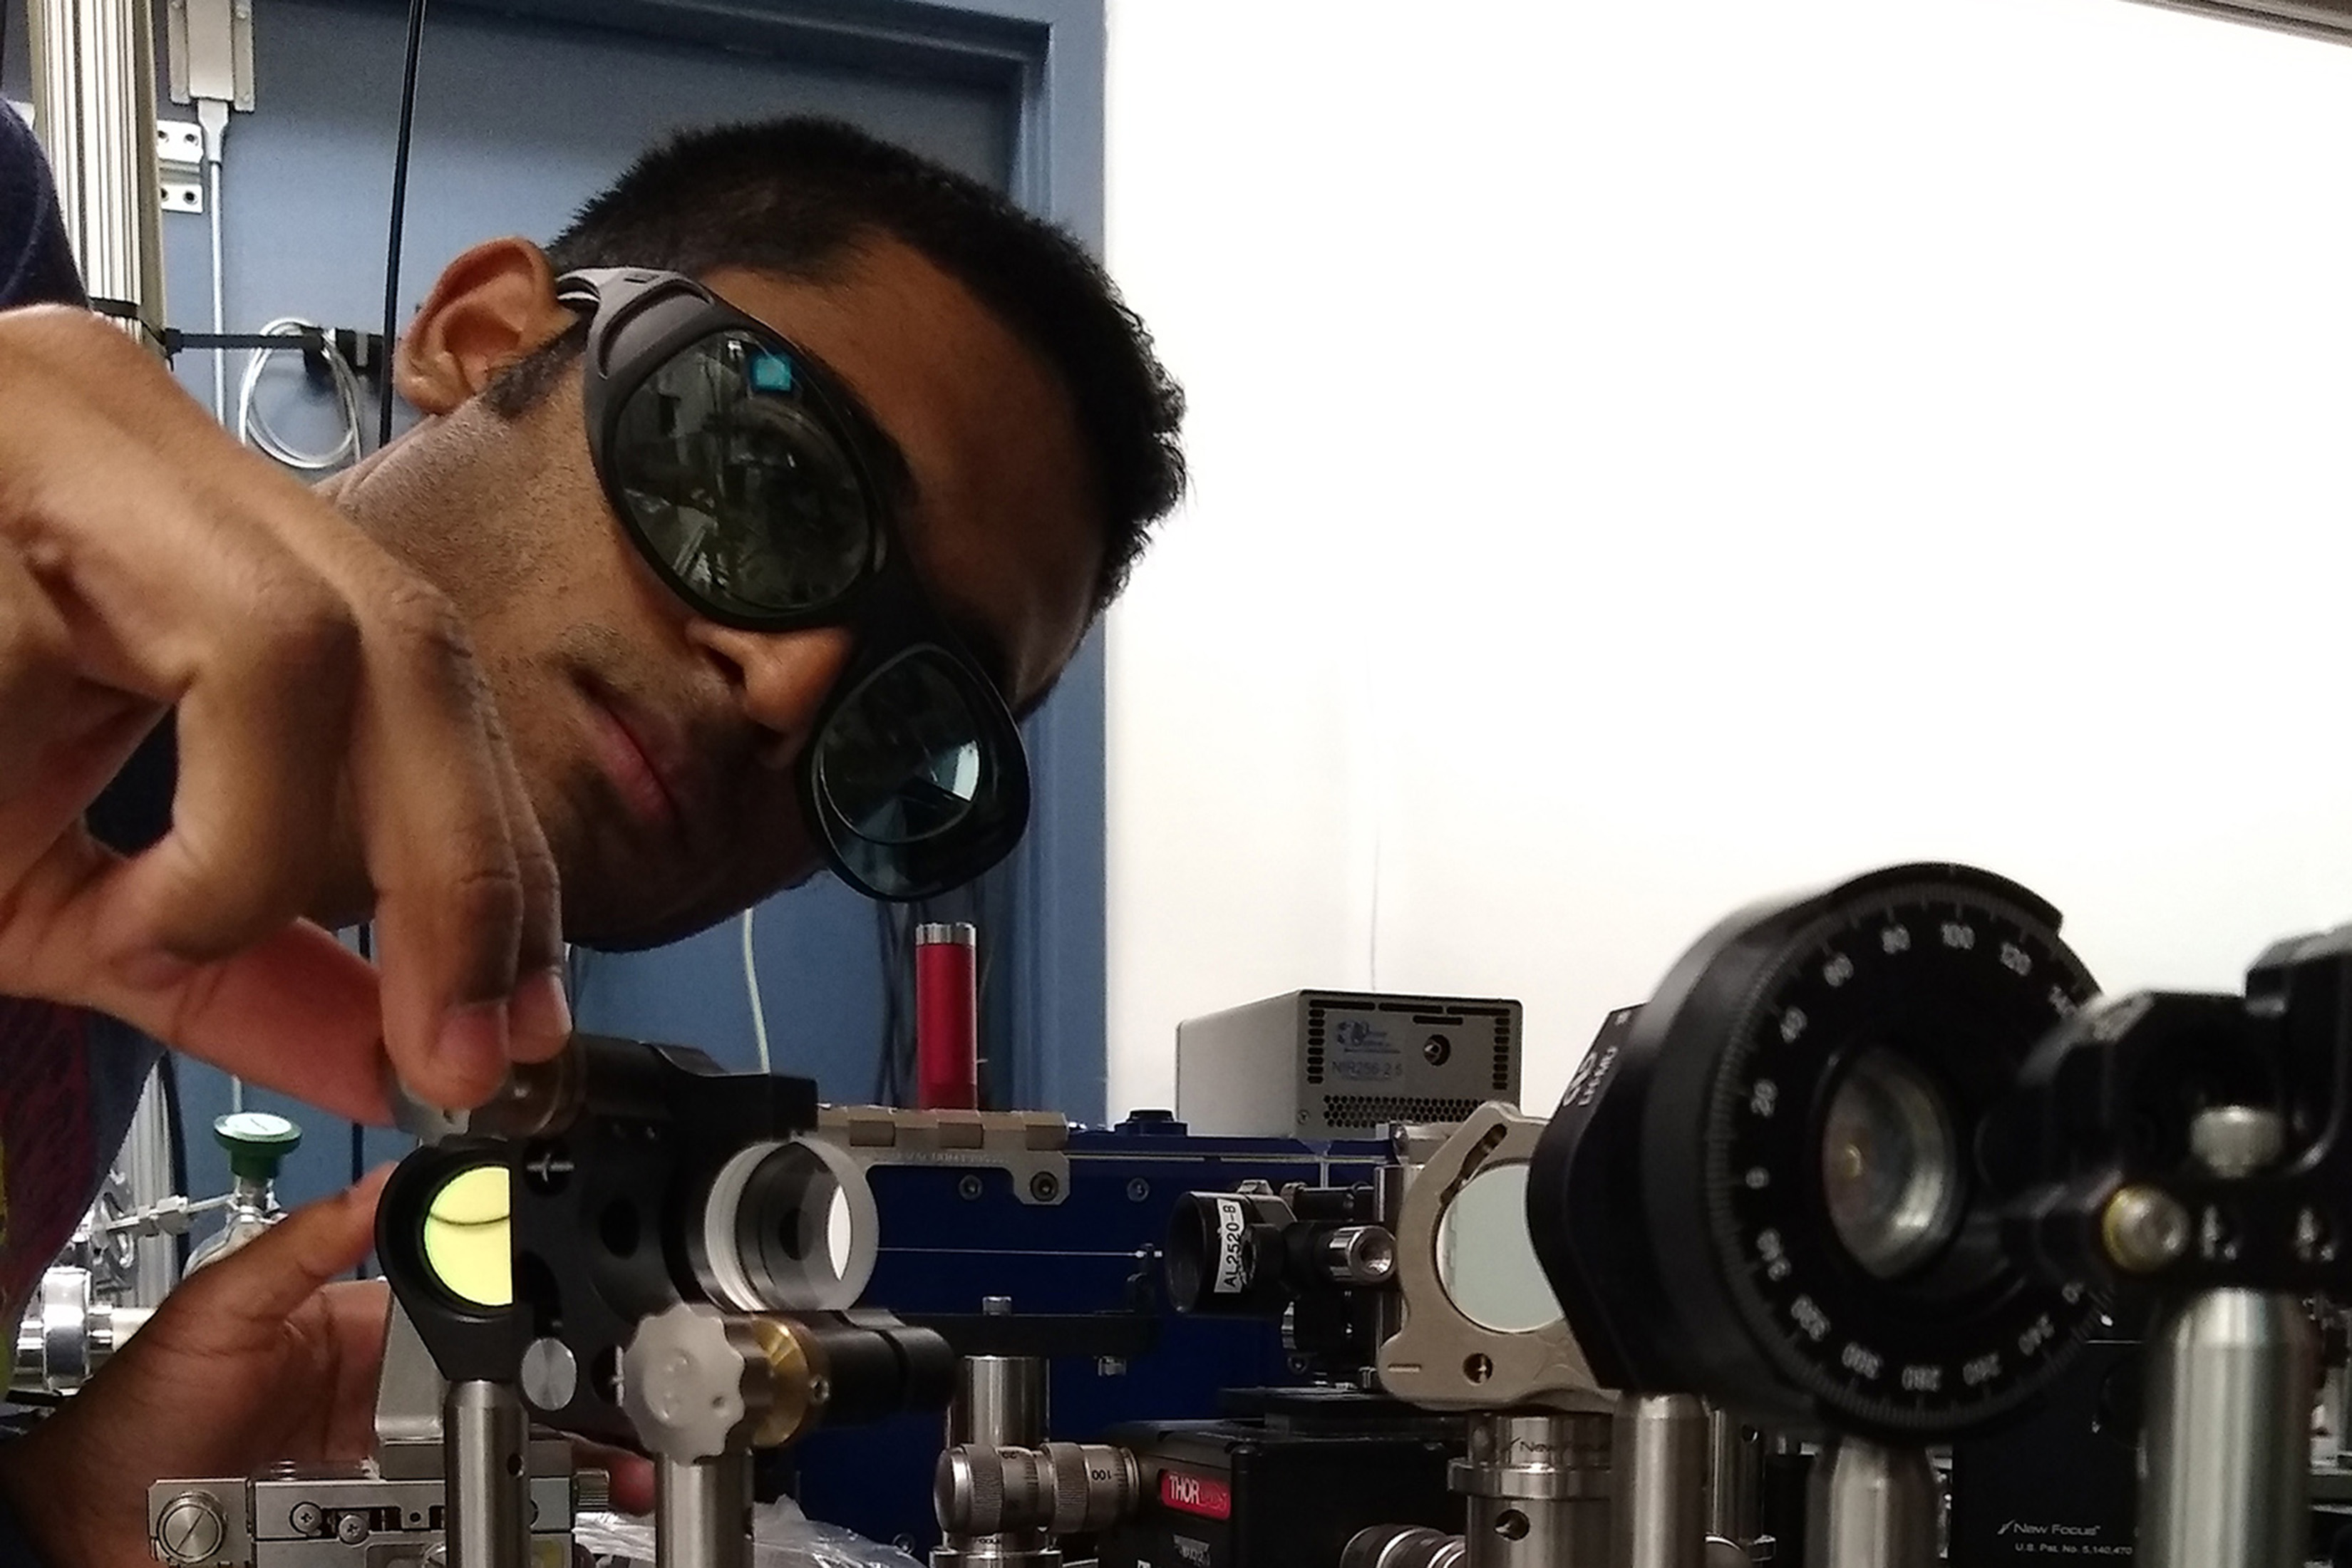 Sahil Pontula is shown in dark glasses leaning over some equipment that includes an array of lenses and various metal parts. He appears to be adjusting some element of the machinery.